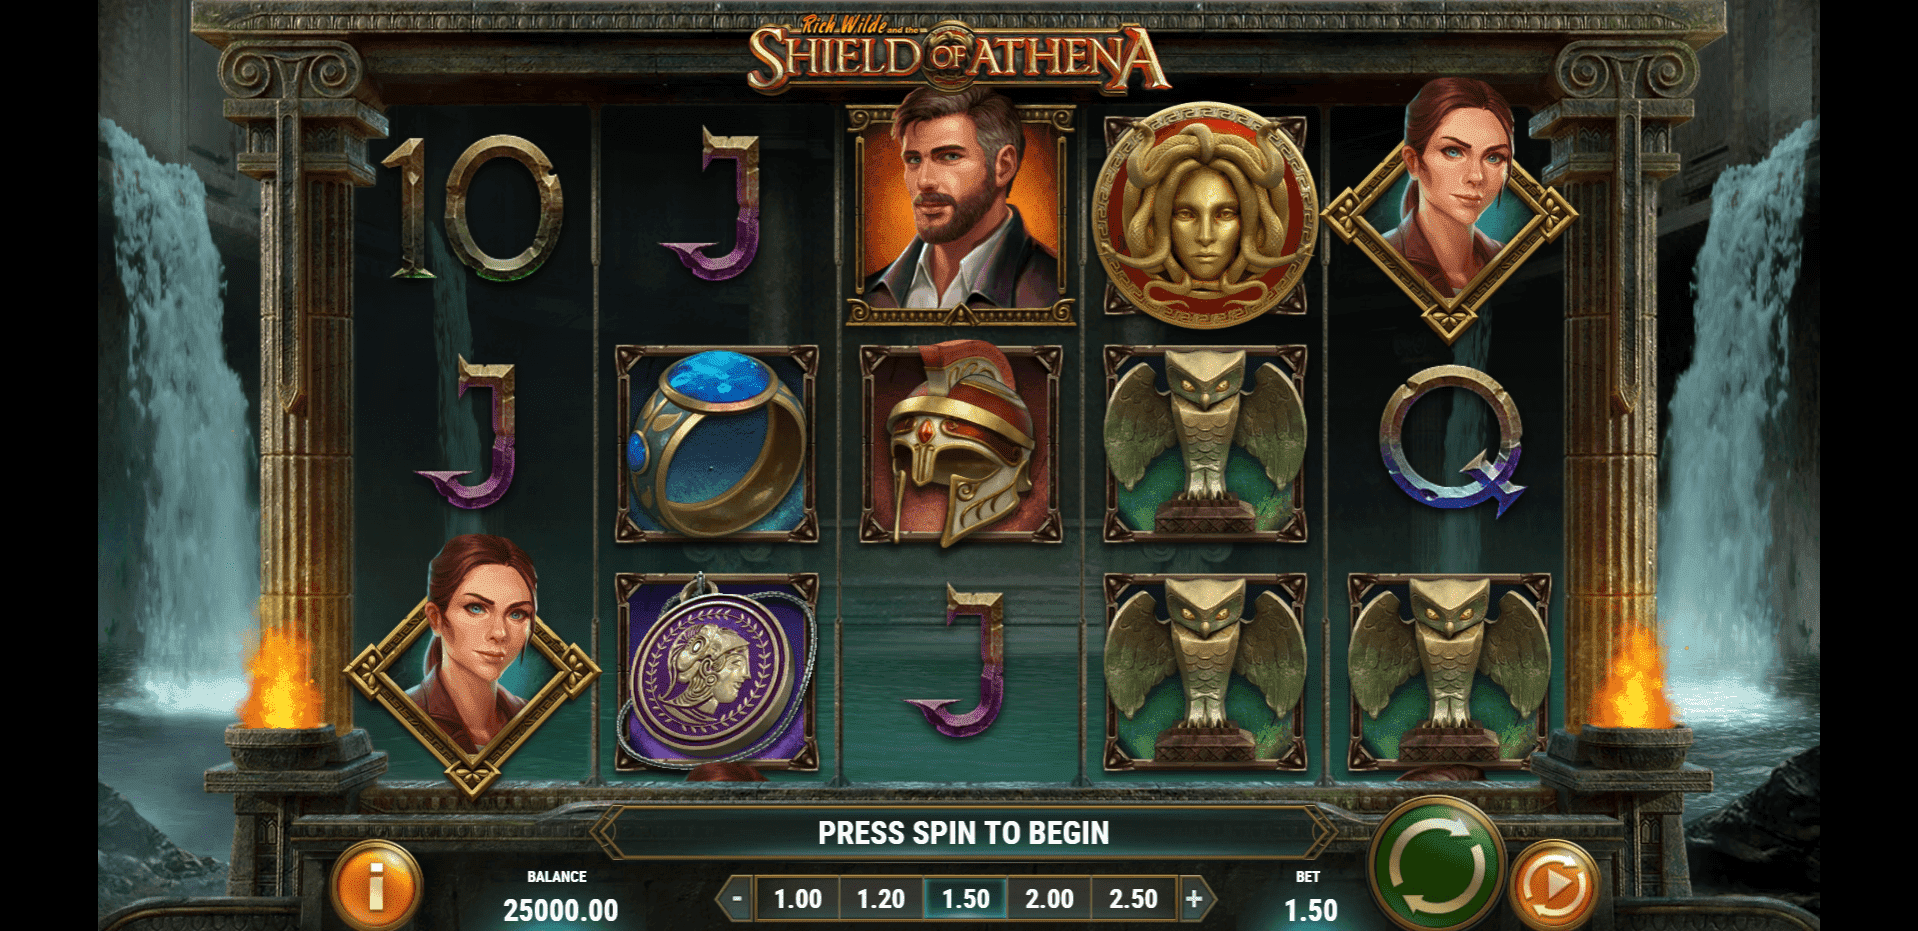 Rich Wilde and the Shield of Athena slot play free